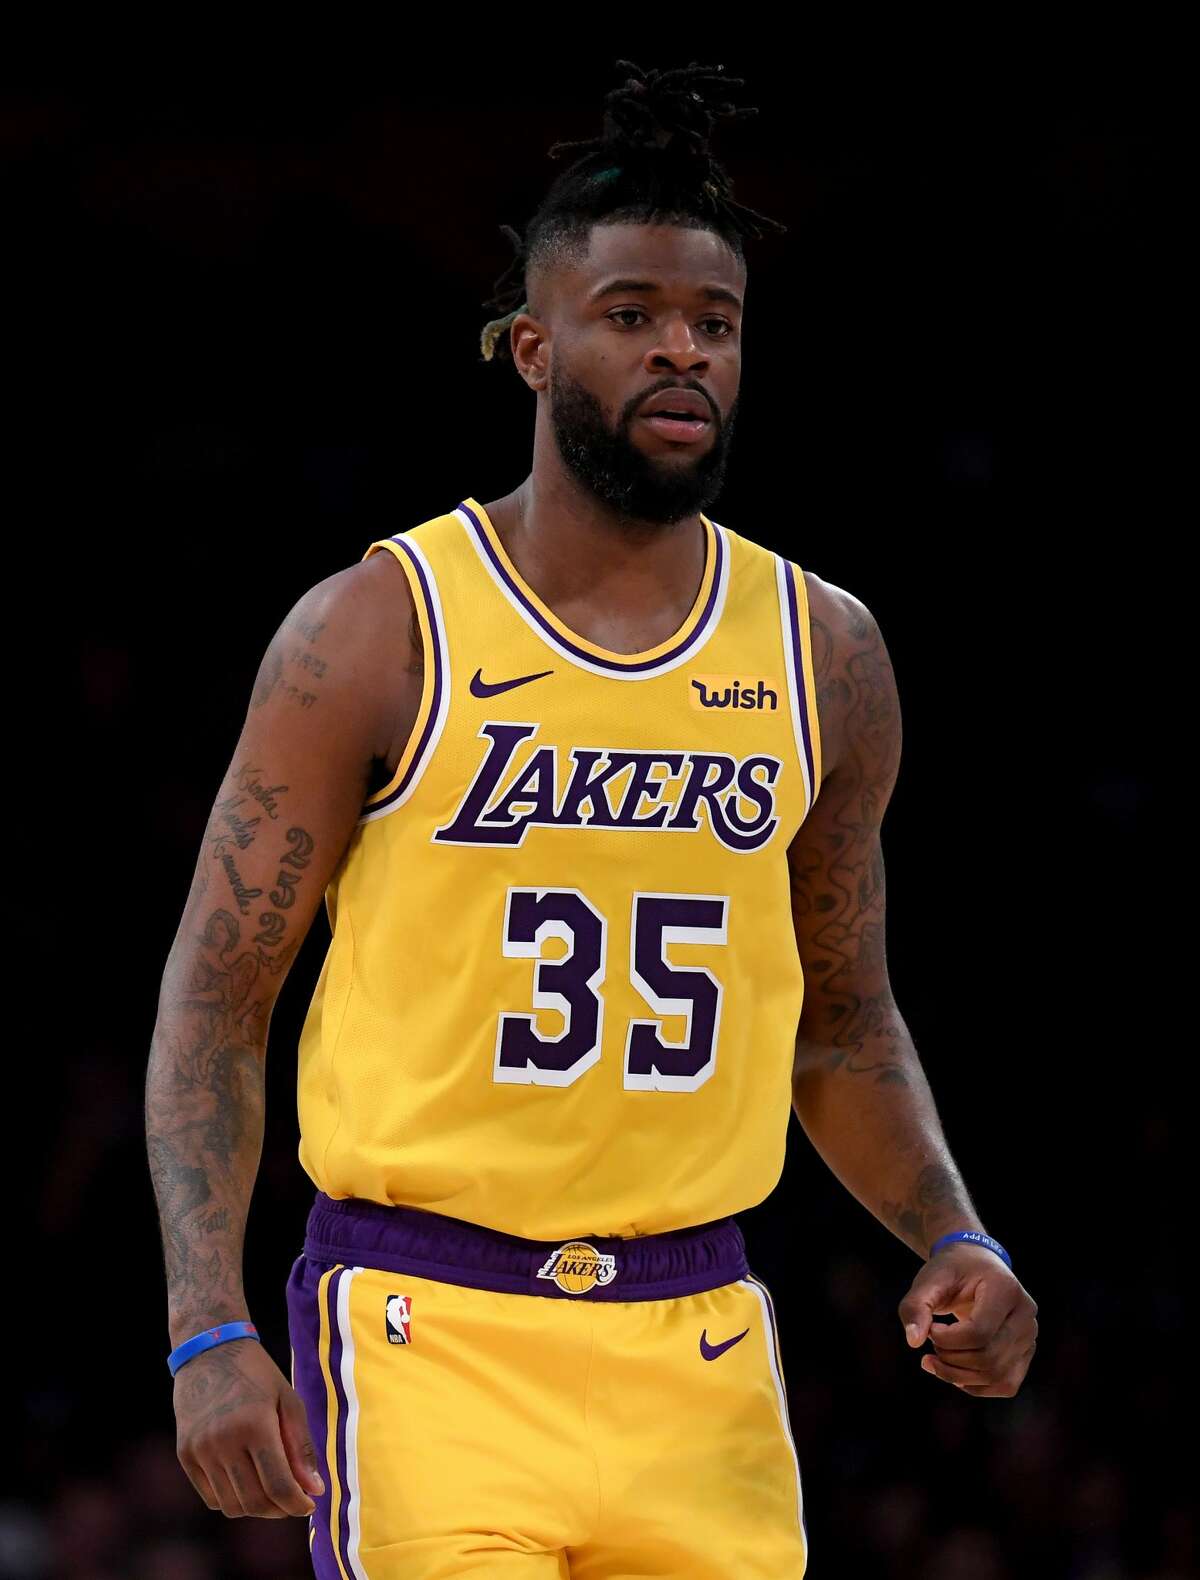 lakers number 21 2019